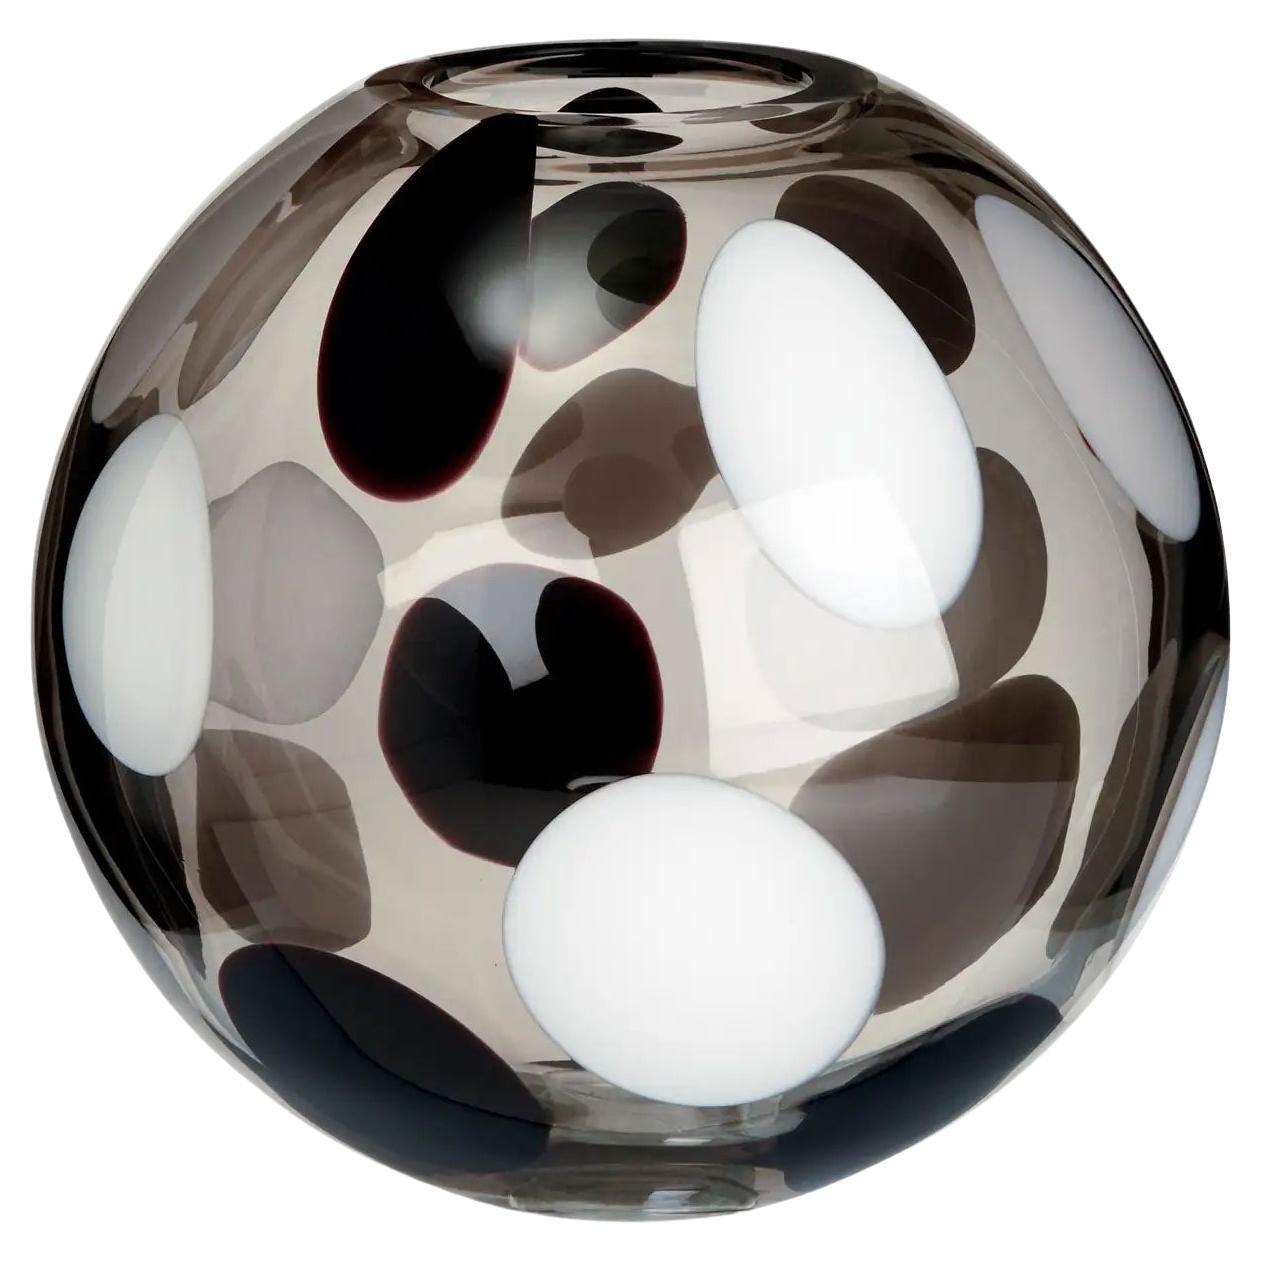 Large Sfera Vase with White, Grey and Black Spots by Carlo Moretti